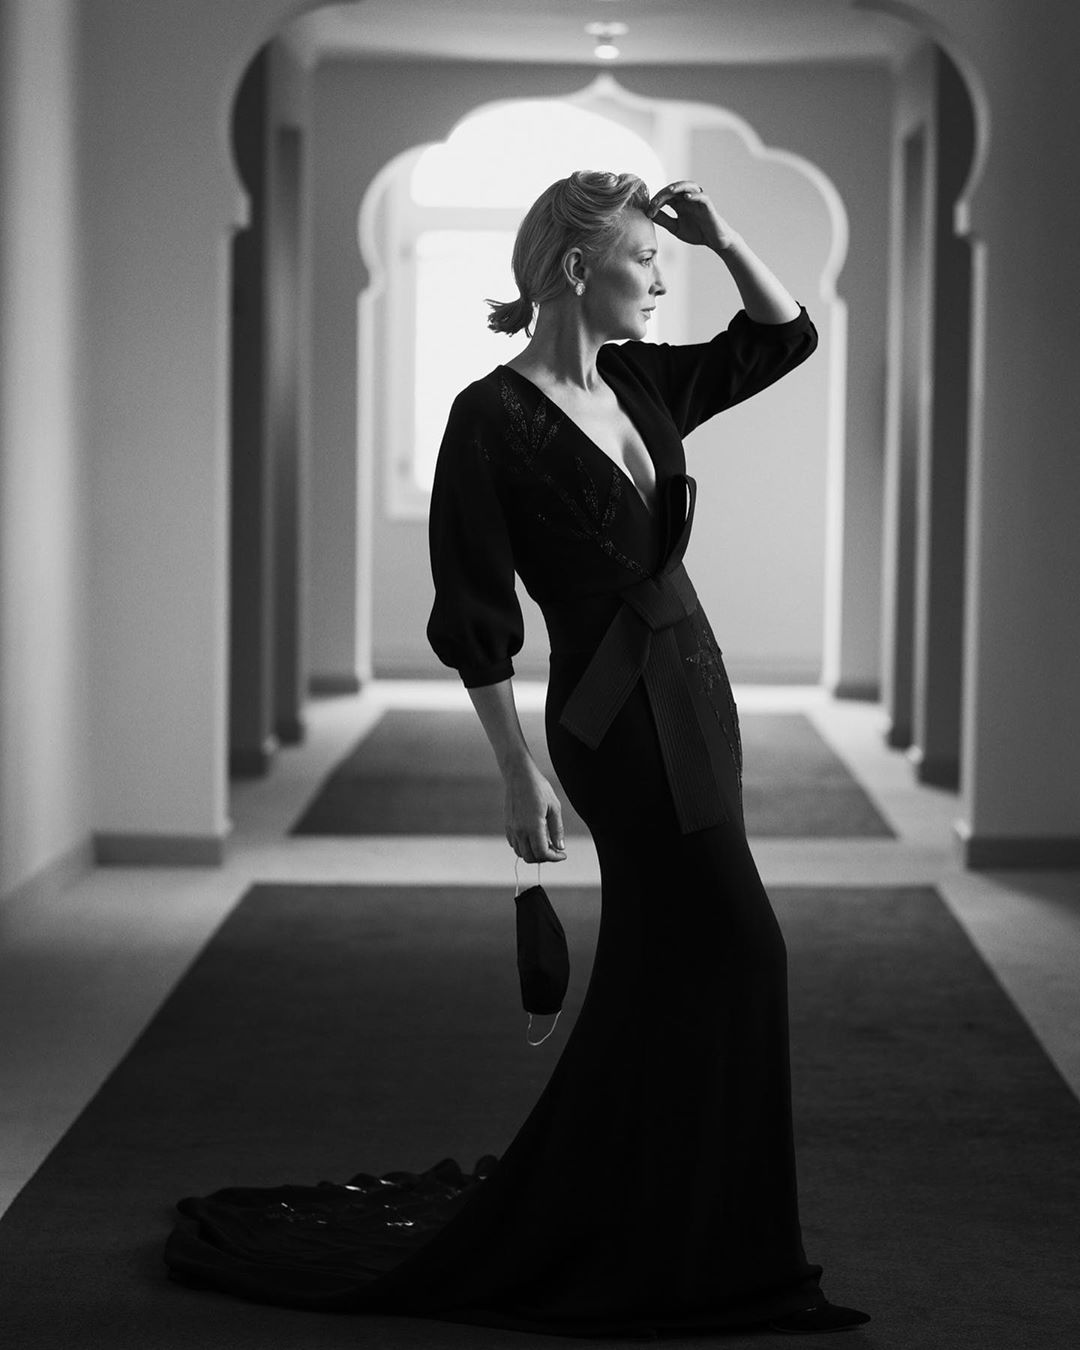 Armani beauty - Behind the scenes at the Venice Film Festival with @gregwilliamsphotography

Eternally elegant Cate Blanchett in a full Armani look at the 77th Venice International Film Festival. 

#A...